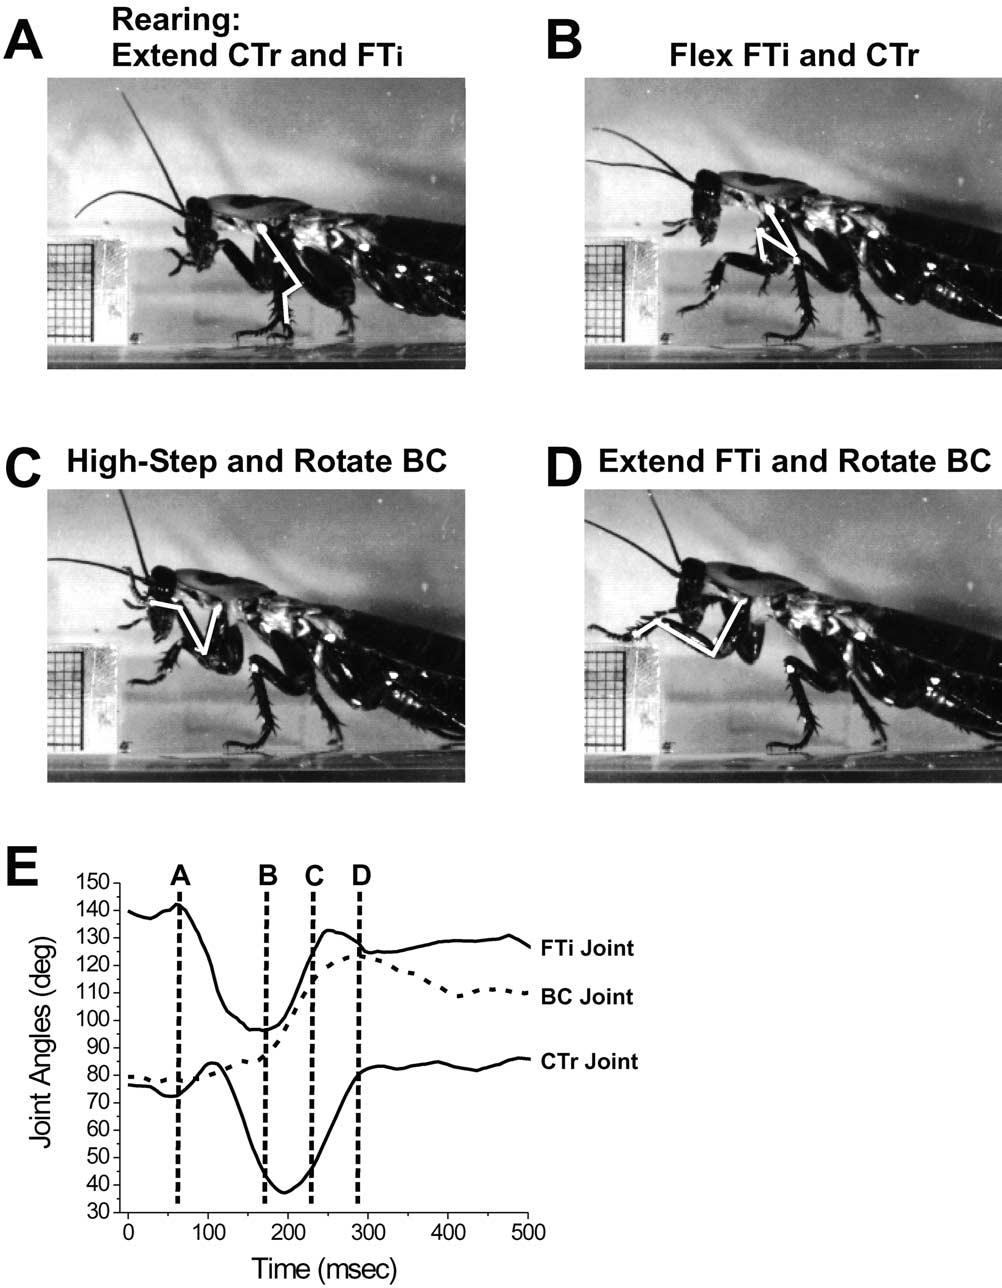 376 R.E. Ritzmann et al. / Arthropod Structure & Development 33 (2004) 361 379 Fig. 12. Rearing movements of a cockroach climbing over a 12 mm plastic block. This figure is set up like Fig.